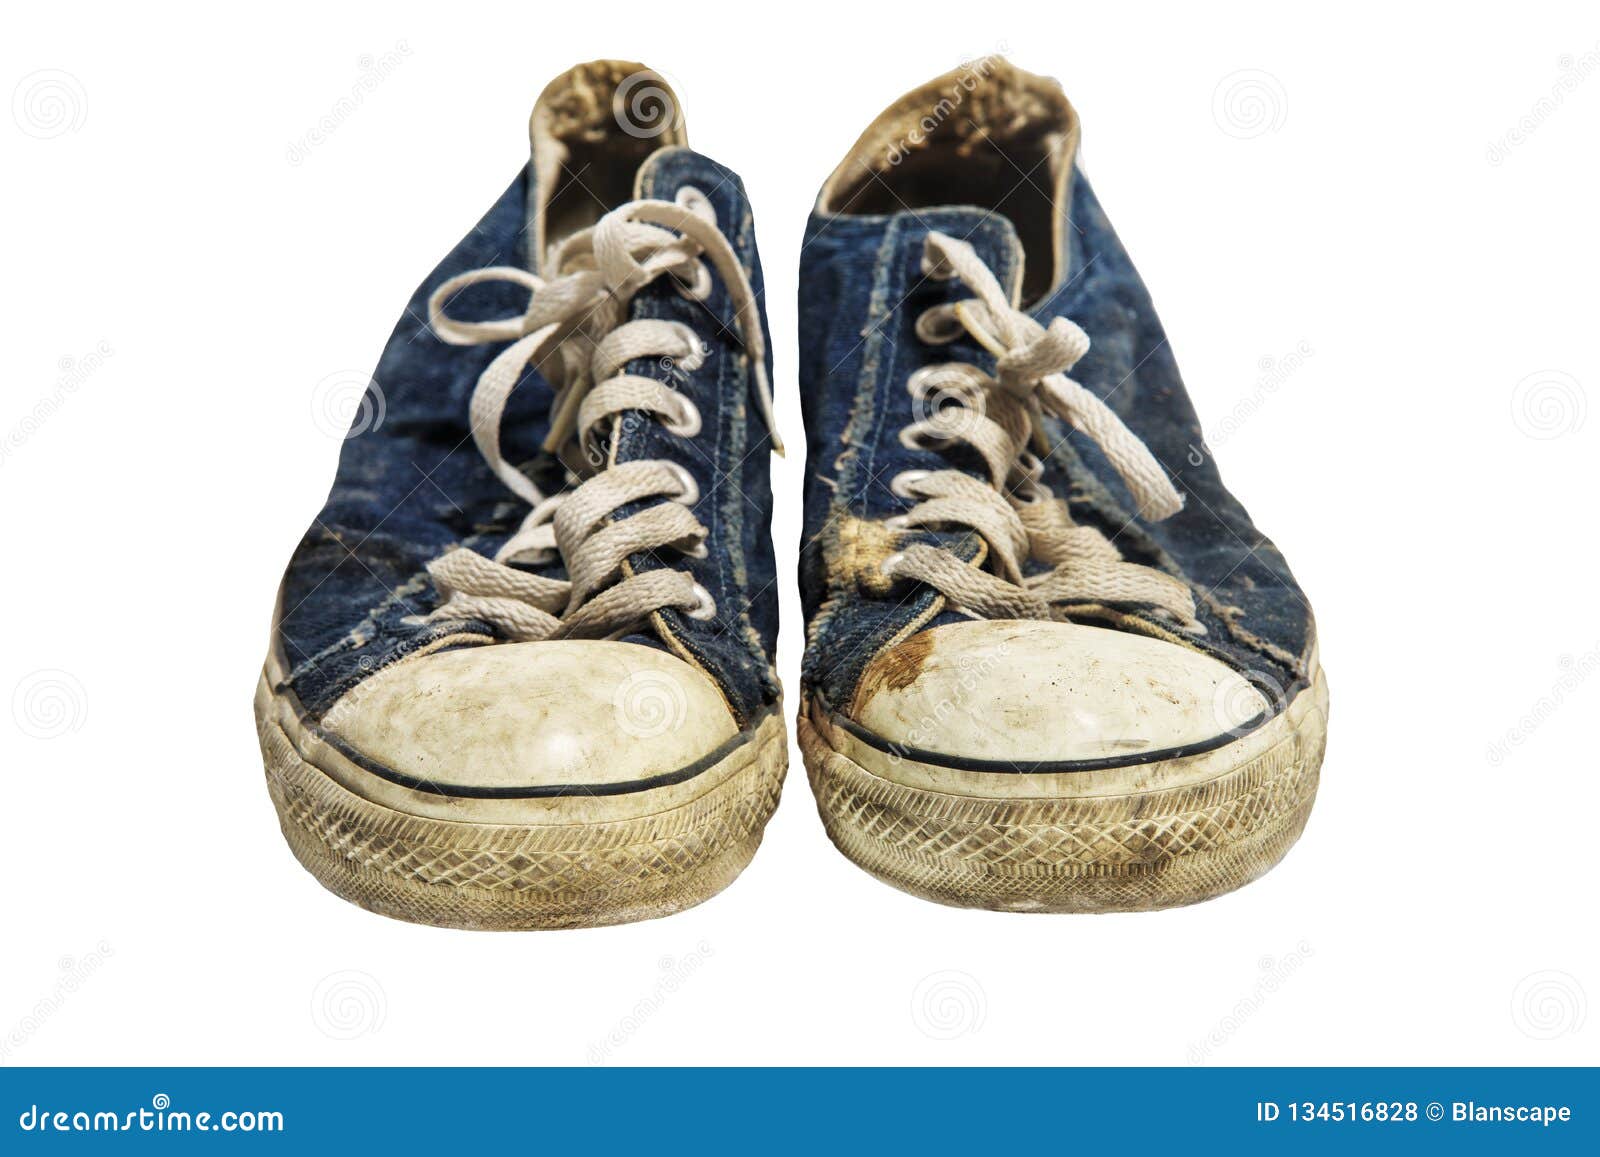 Pair of old blue sneakers stock photo. Image of dirt - 134516828